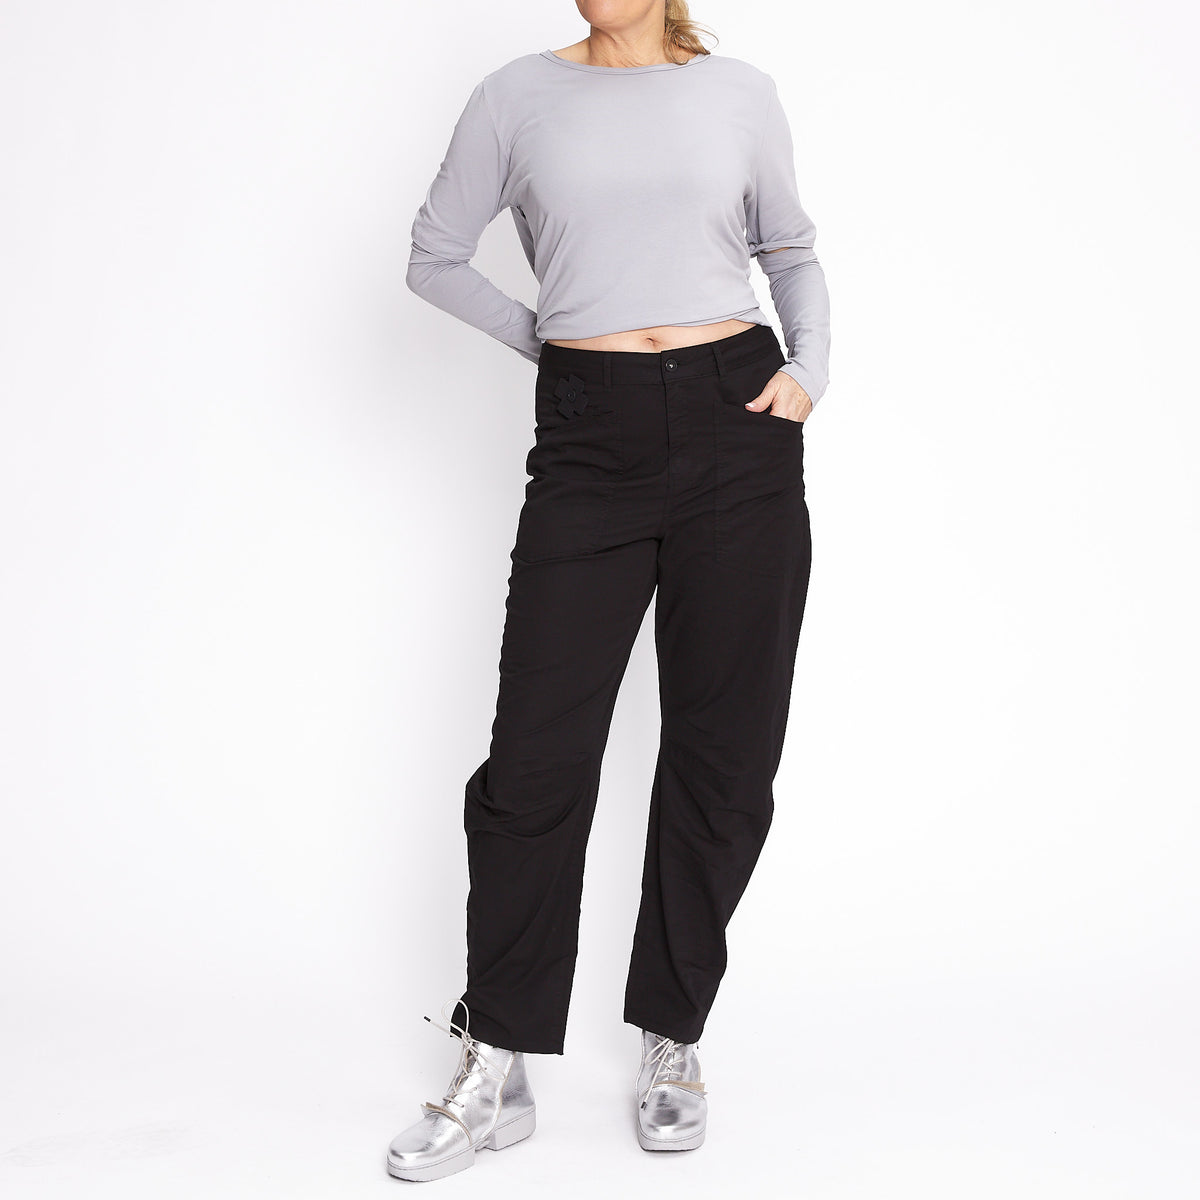 A Great Pant - Black